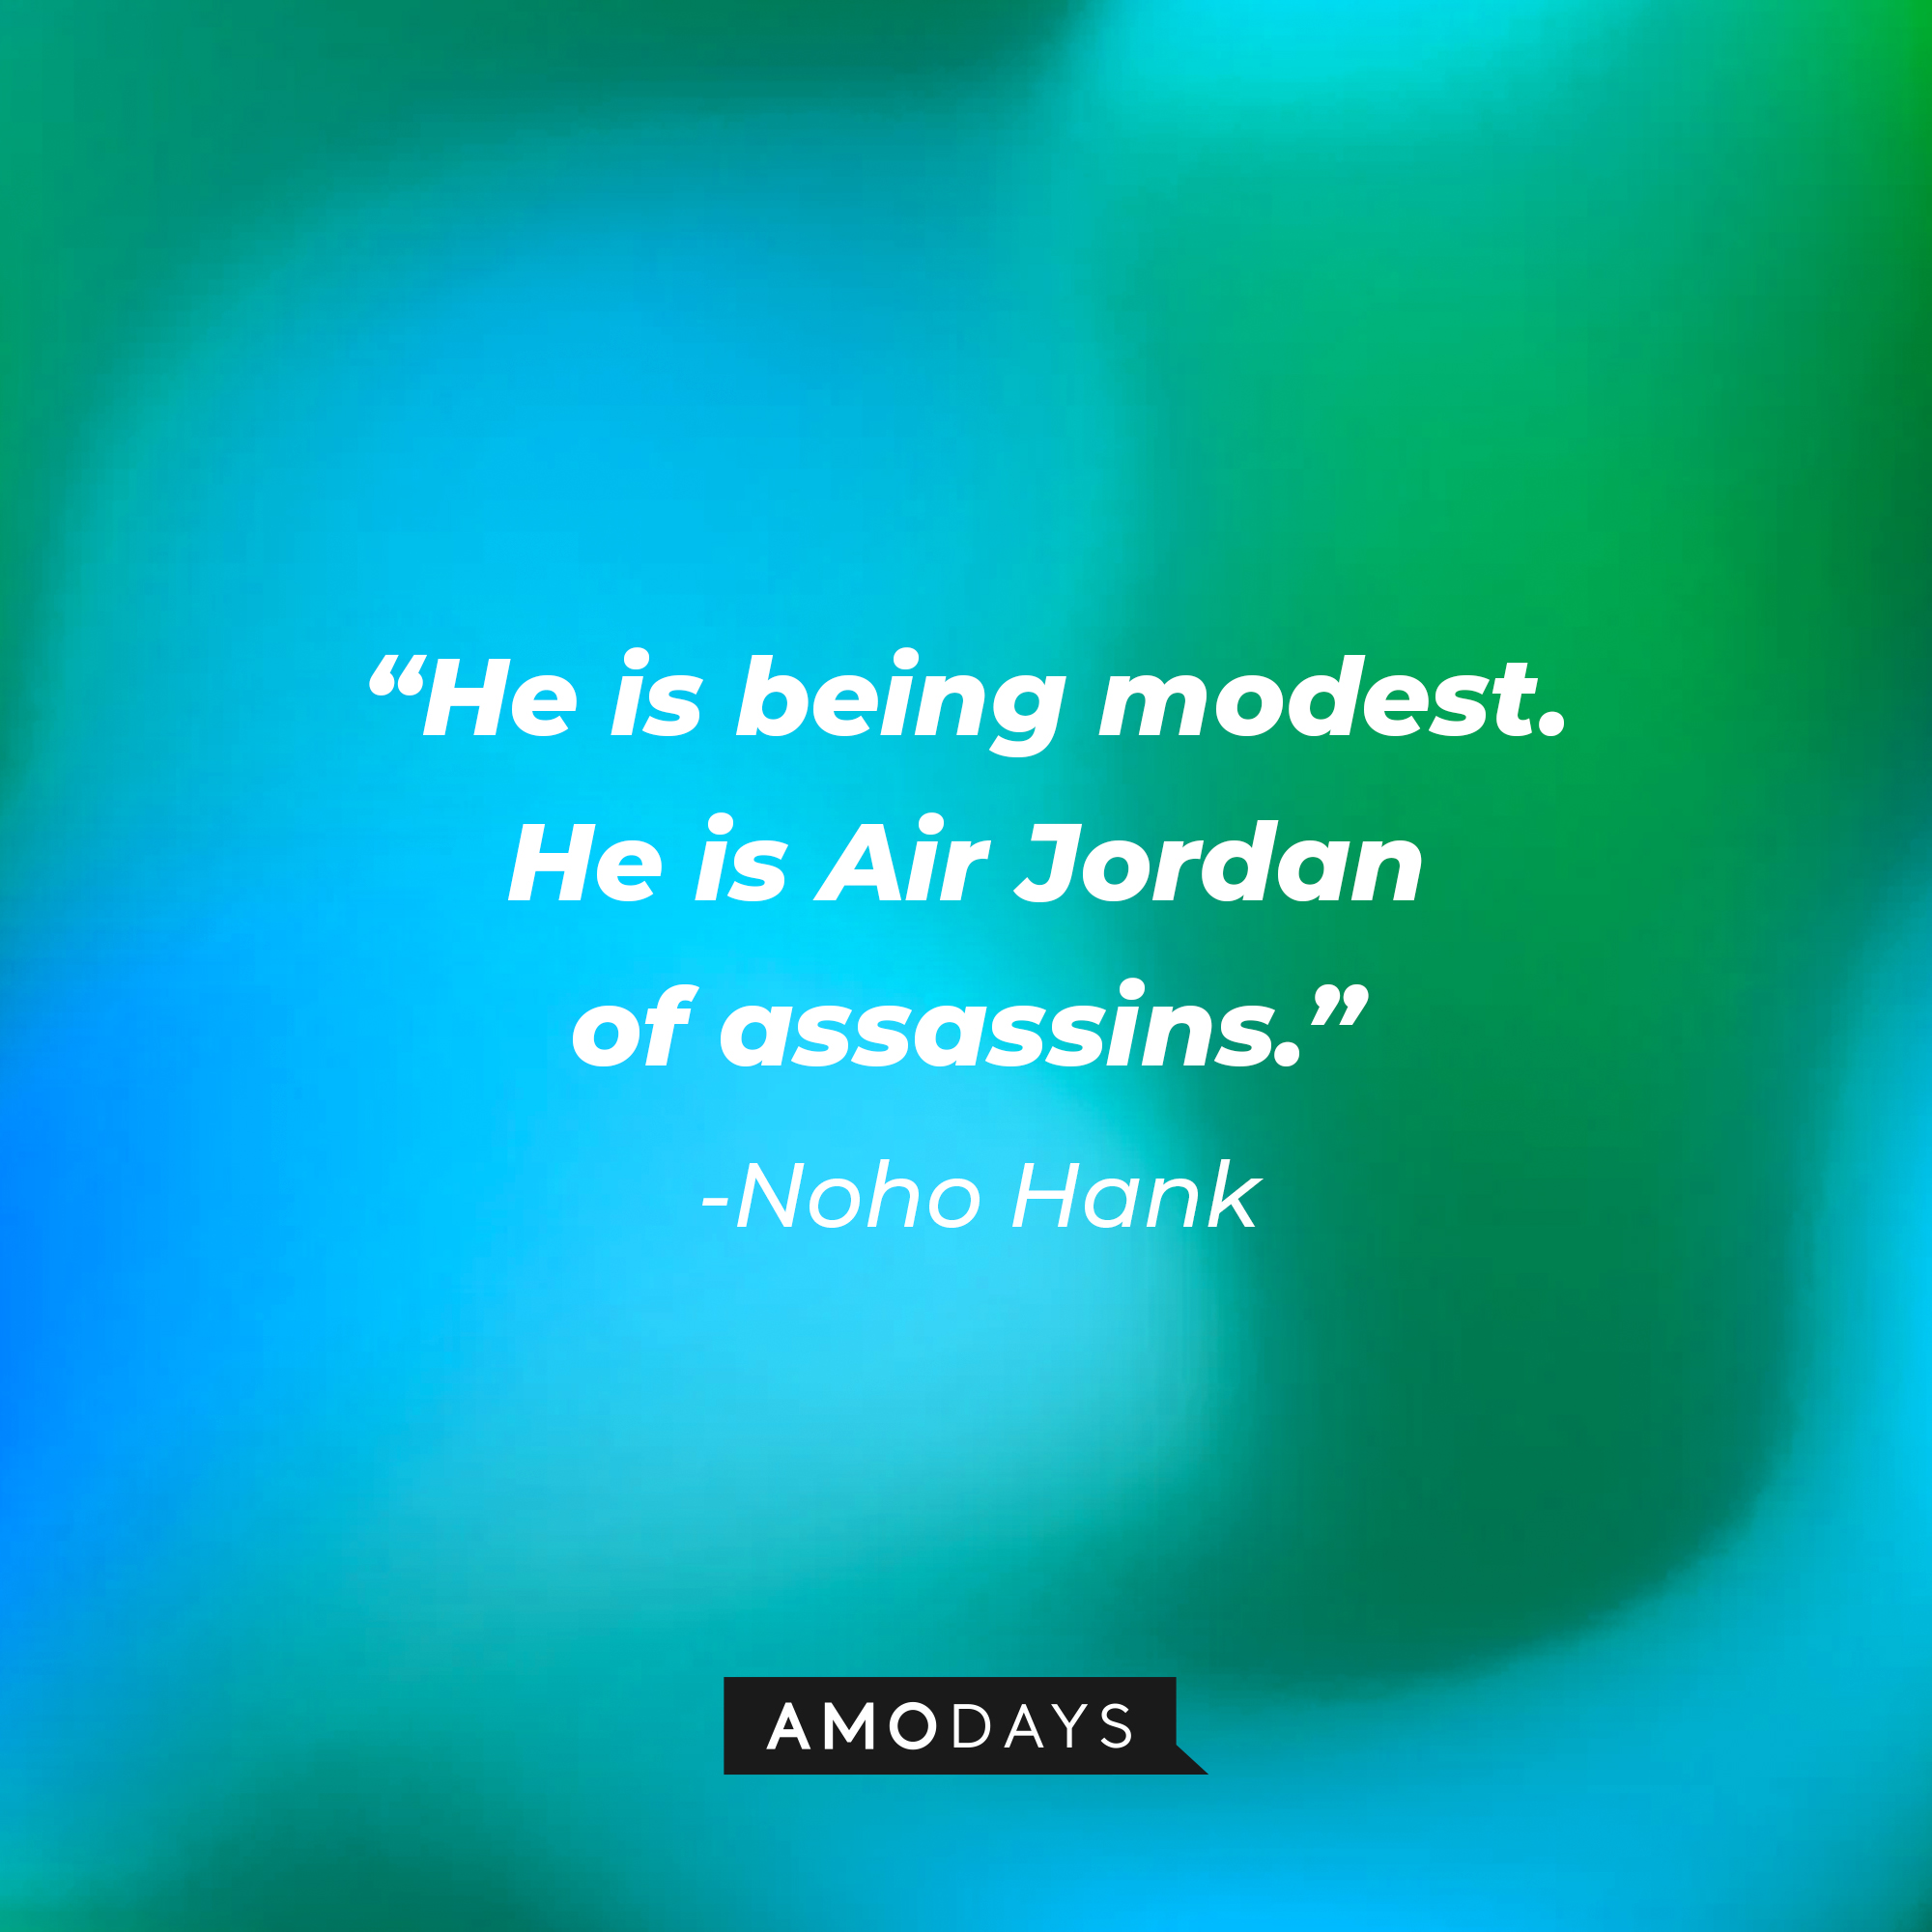 NoHo Hank, with his quote: “He is being modest. He is Air Jordan of assassins.” | Source: AmoDays